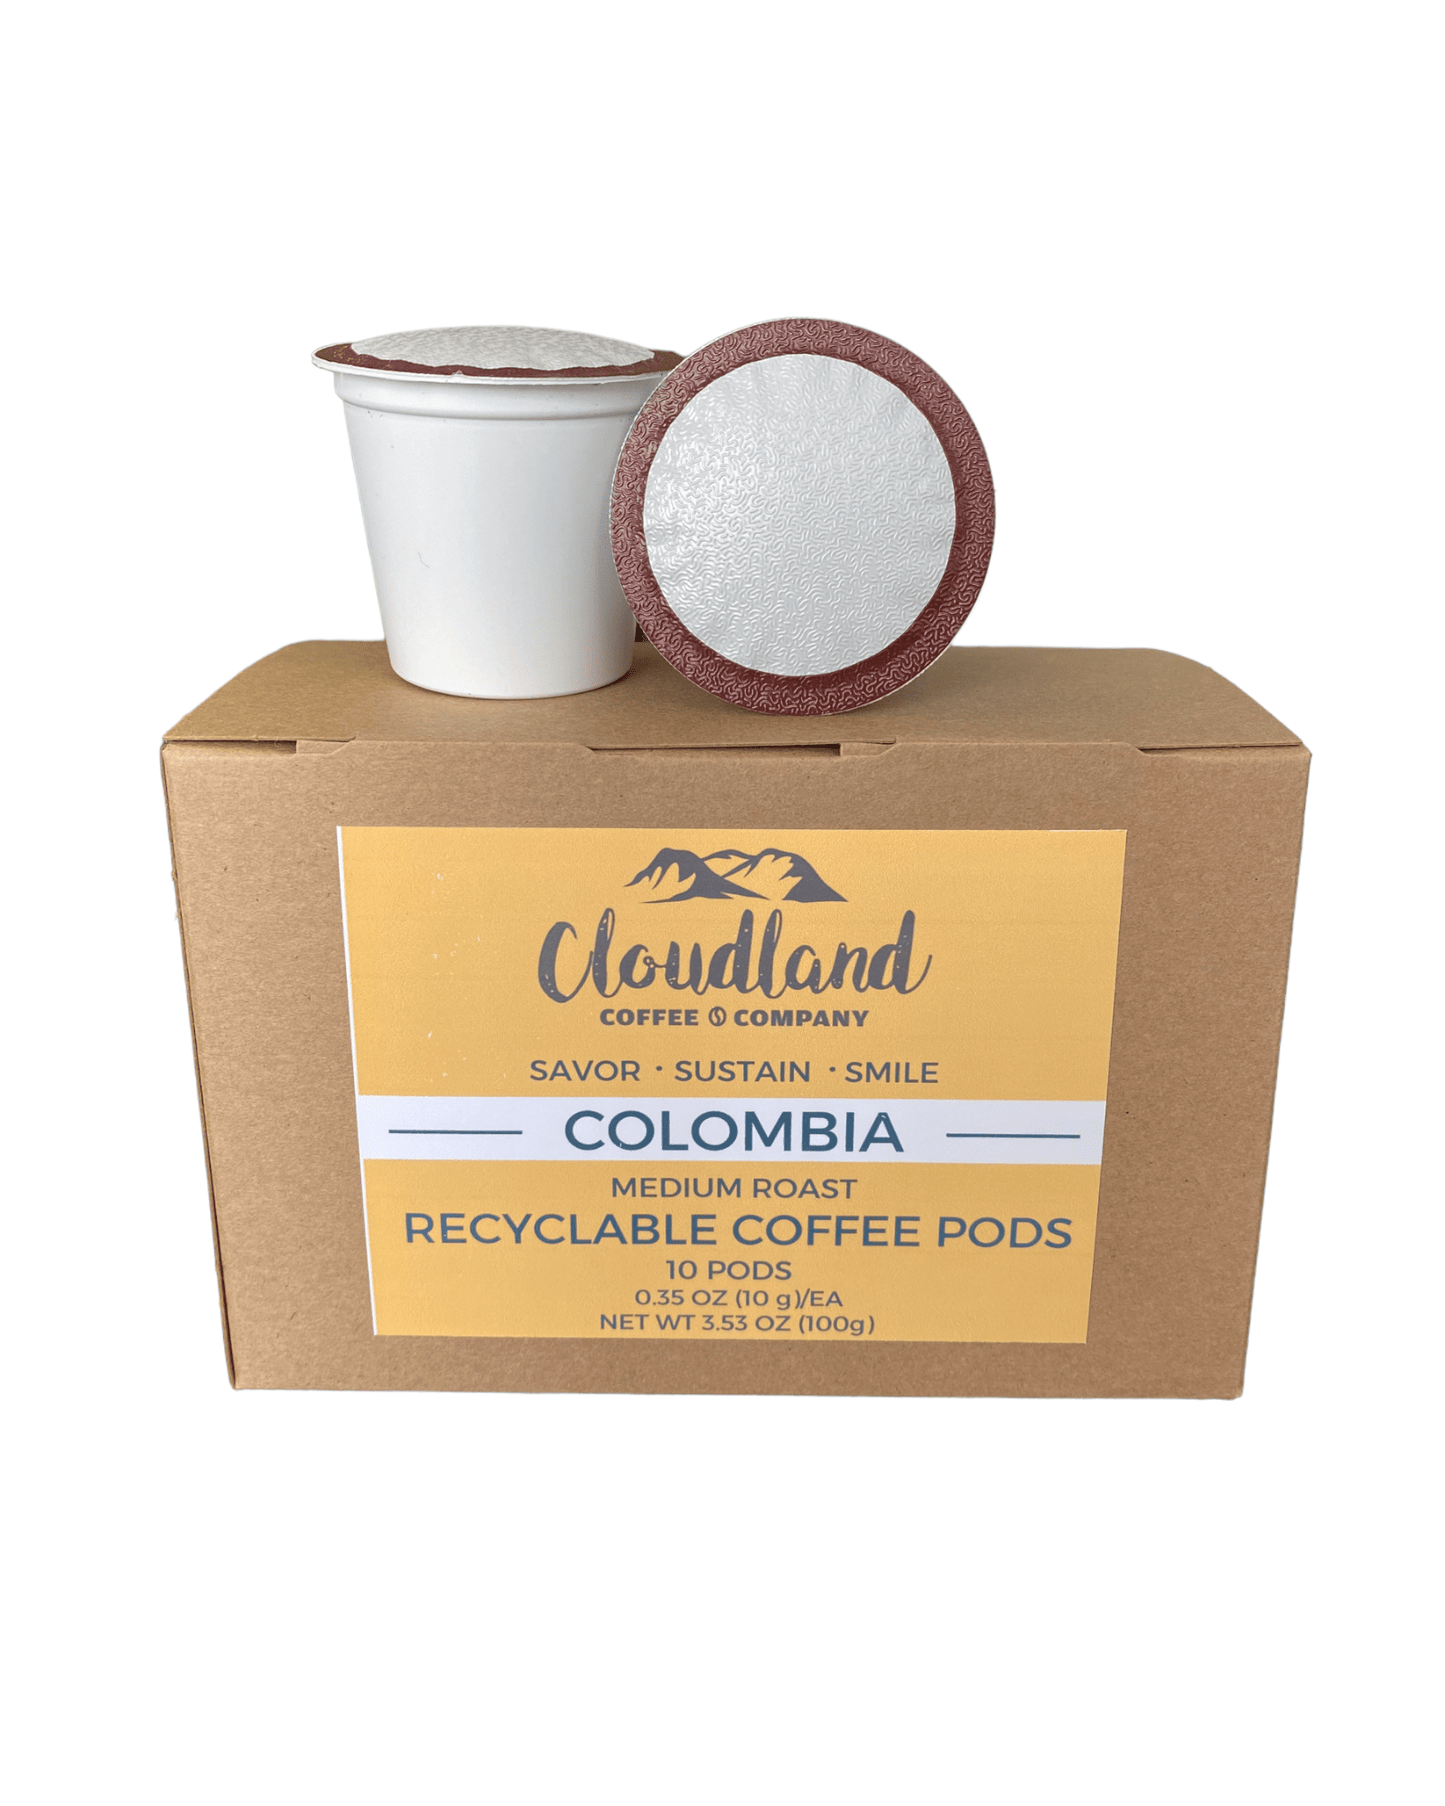 Colombia Recyclable Coffee Pods